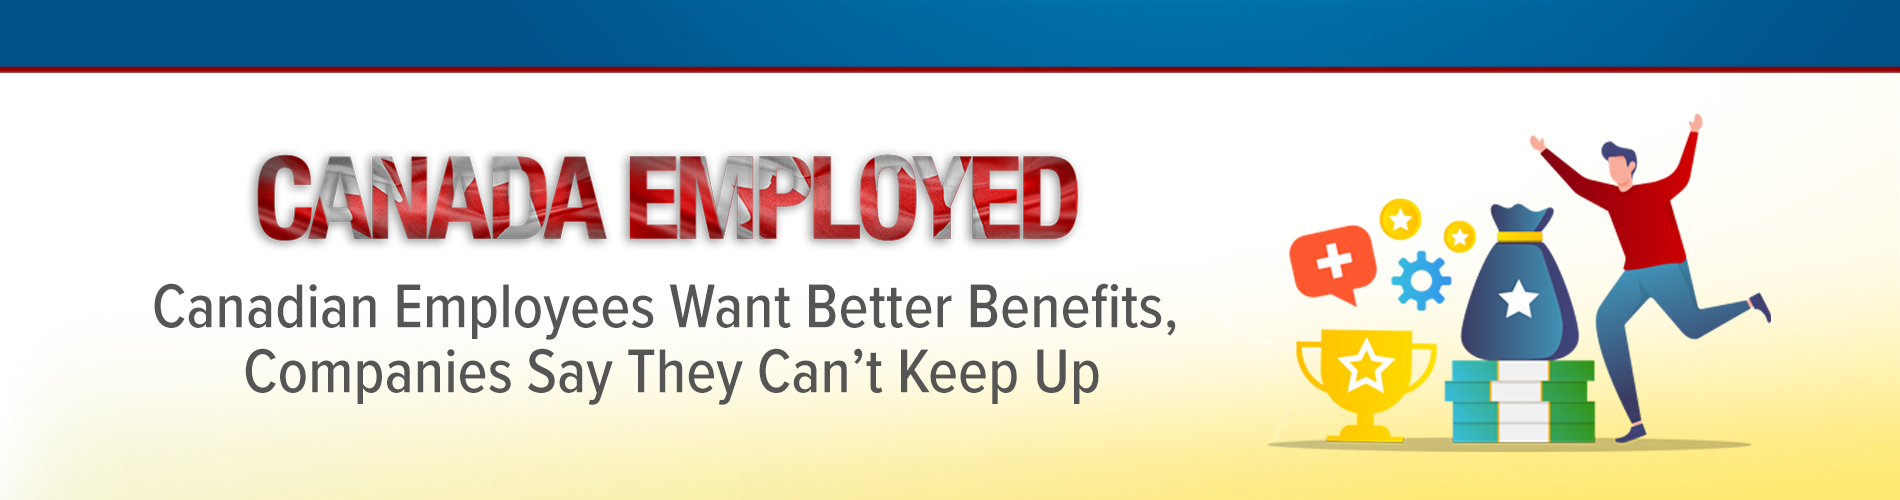 4-10-24 Benefits for Retention - Canada Employed